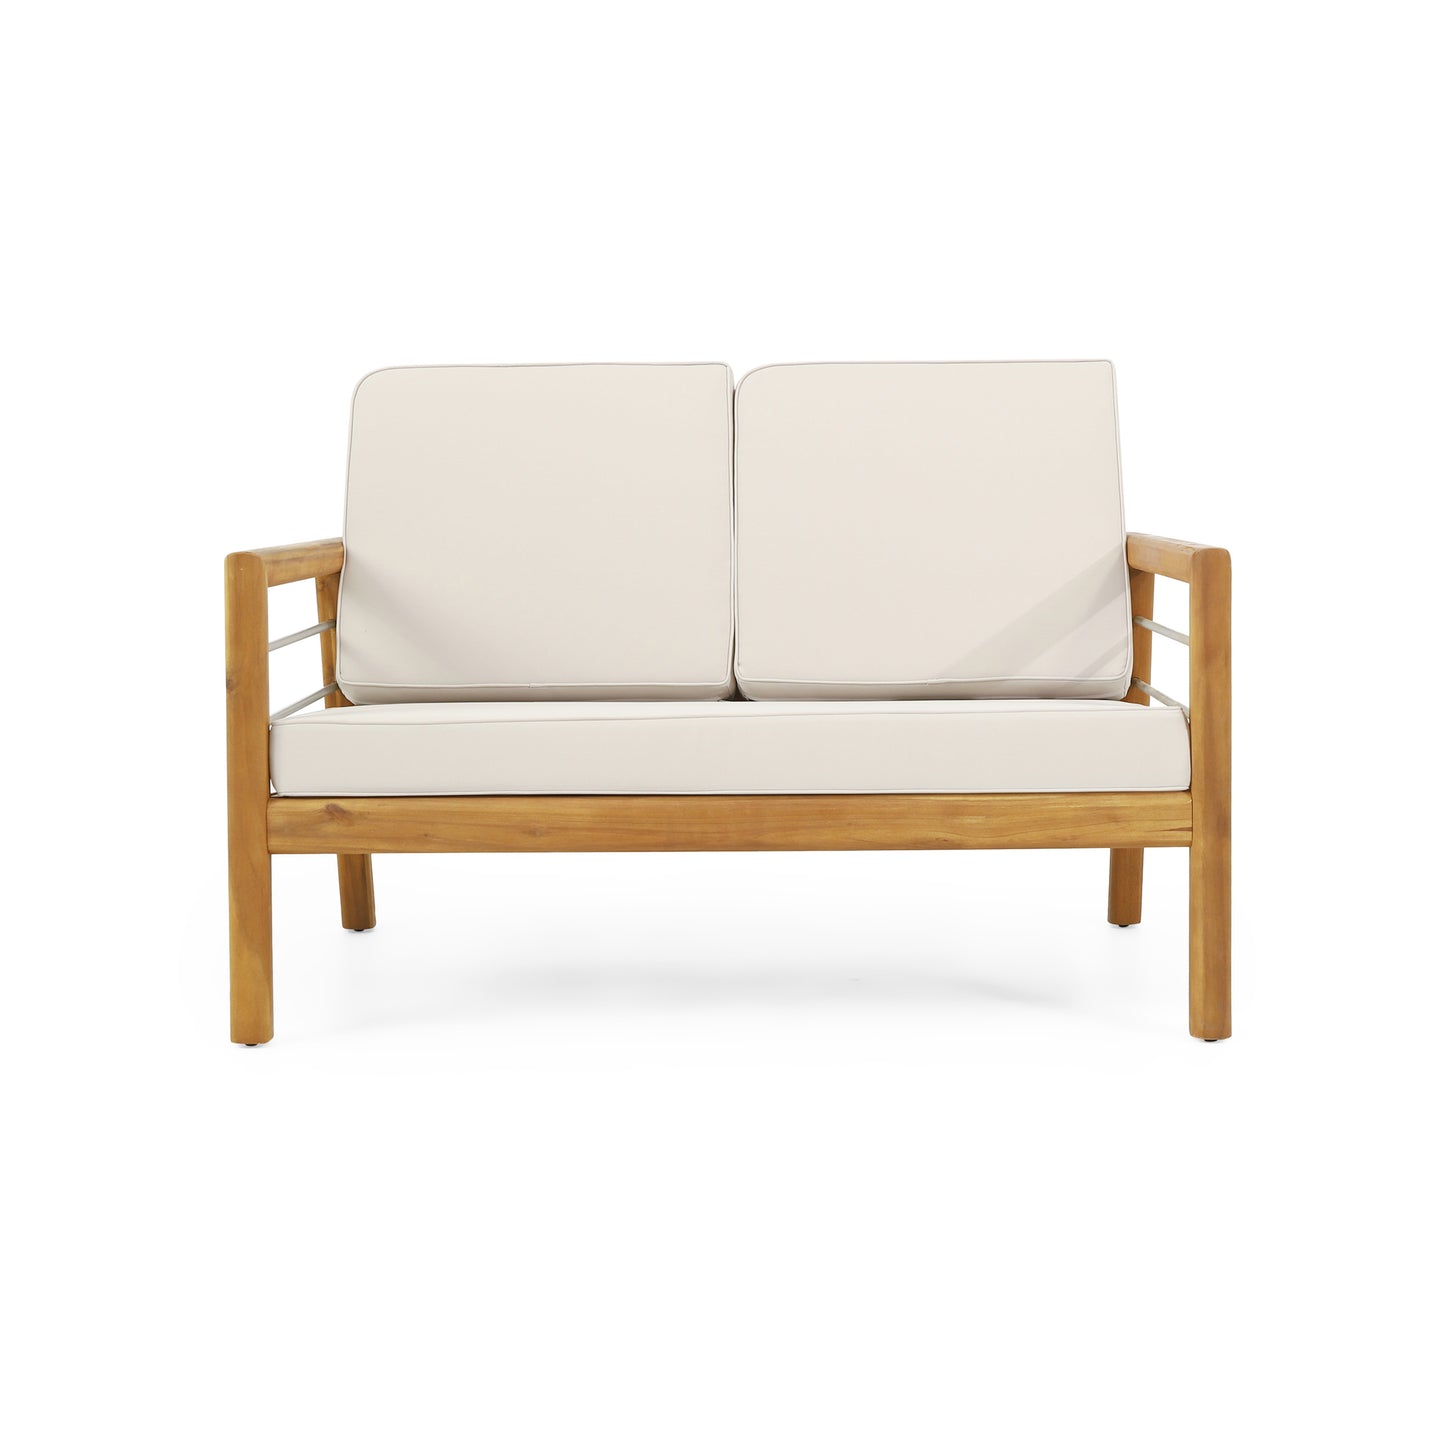 Lindsey Outdoor Acacia Wood Loveseat and Coffee Table Set with Cushions, Teak, Silver, and Beige